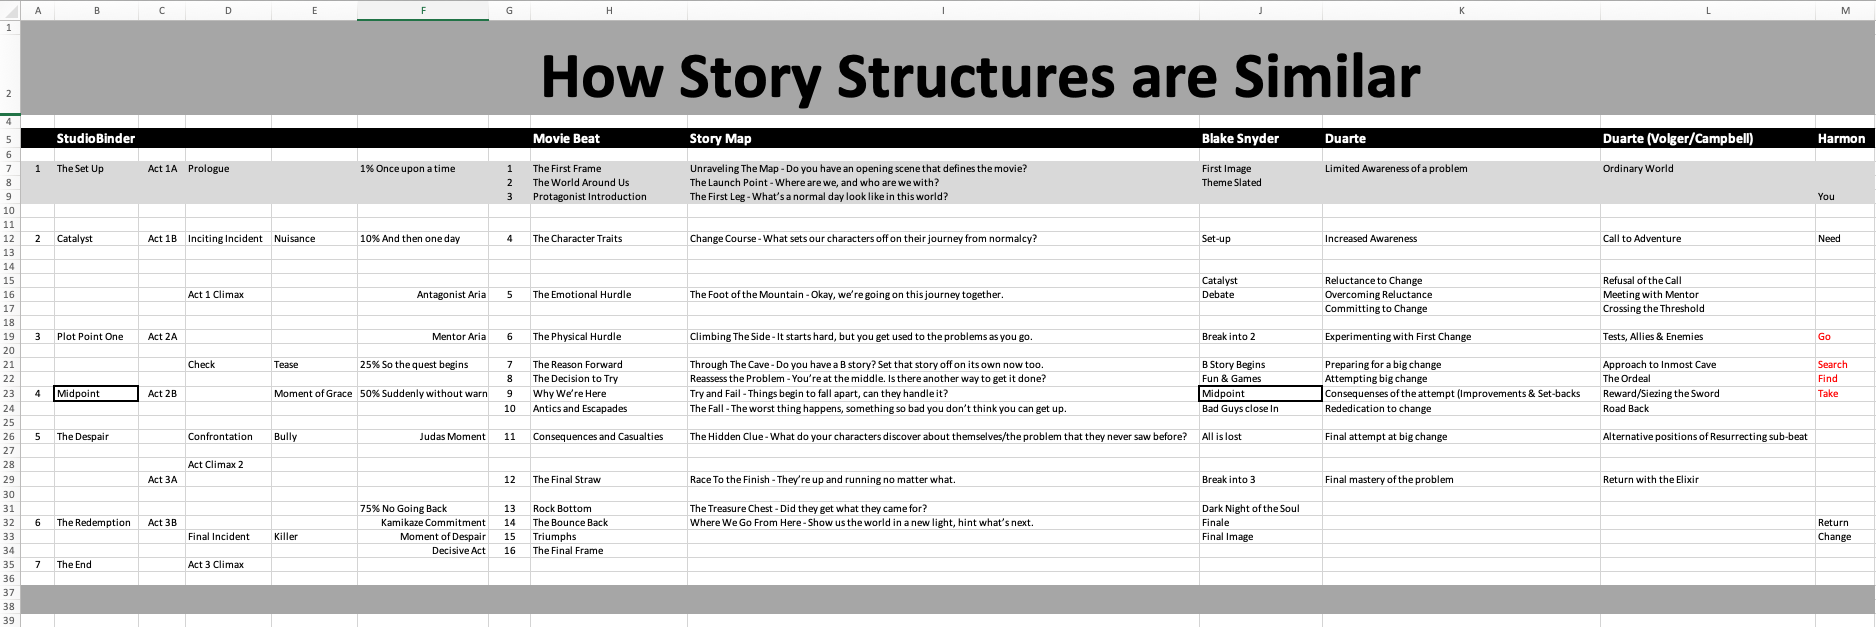 StoryStructures